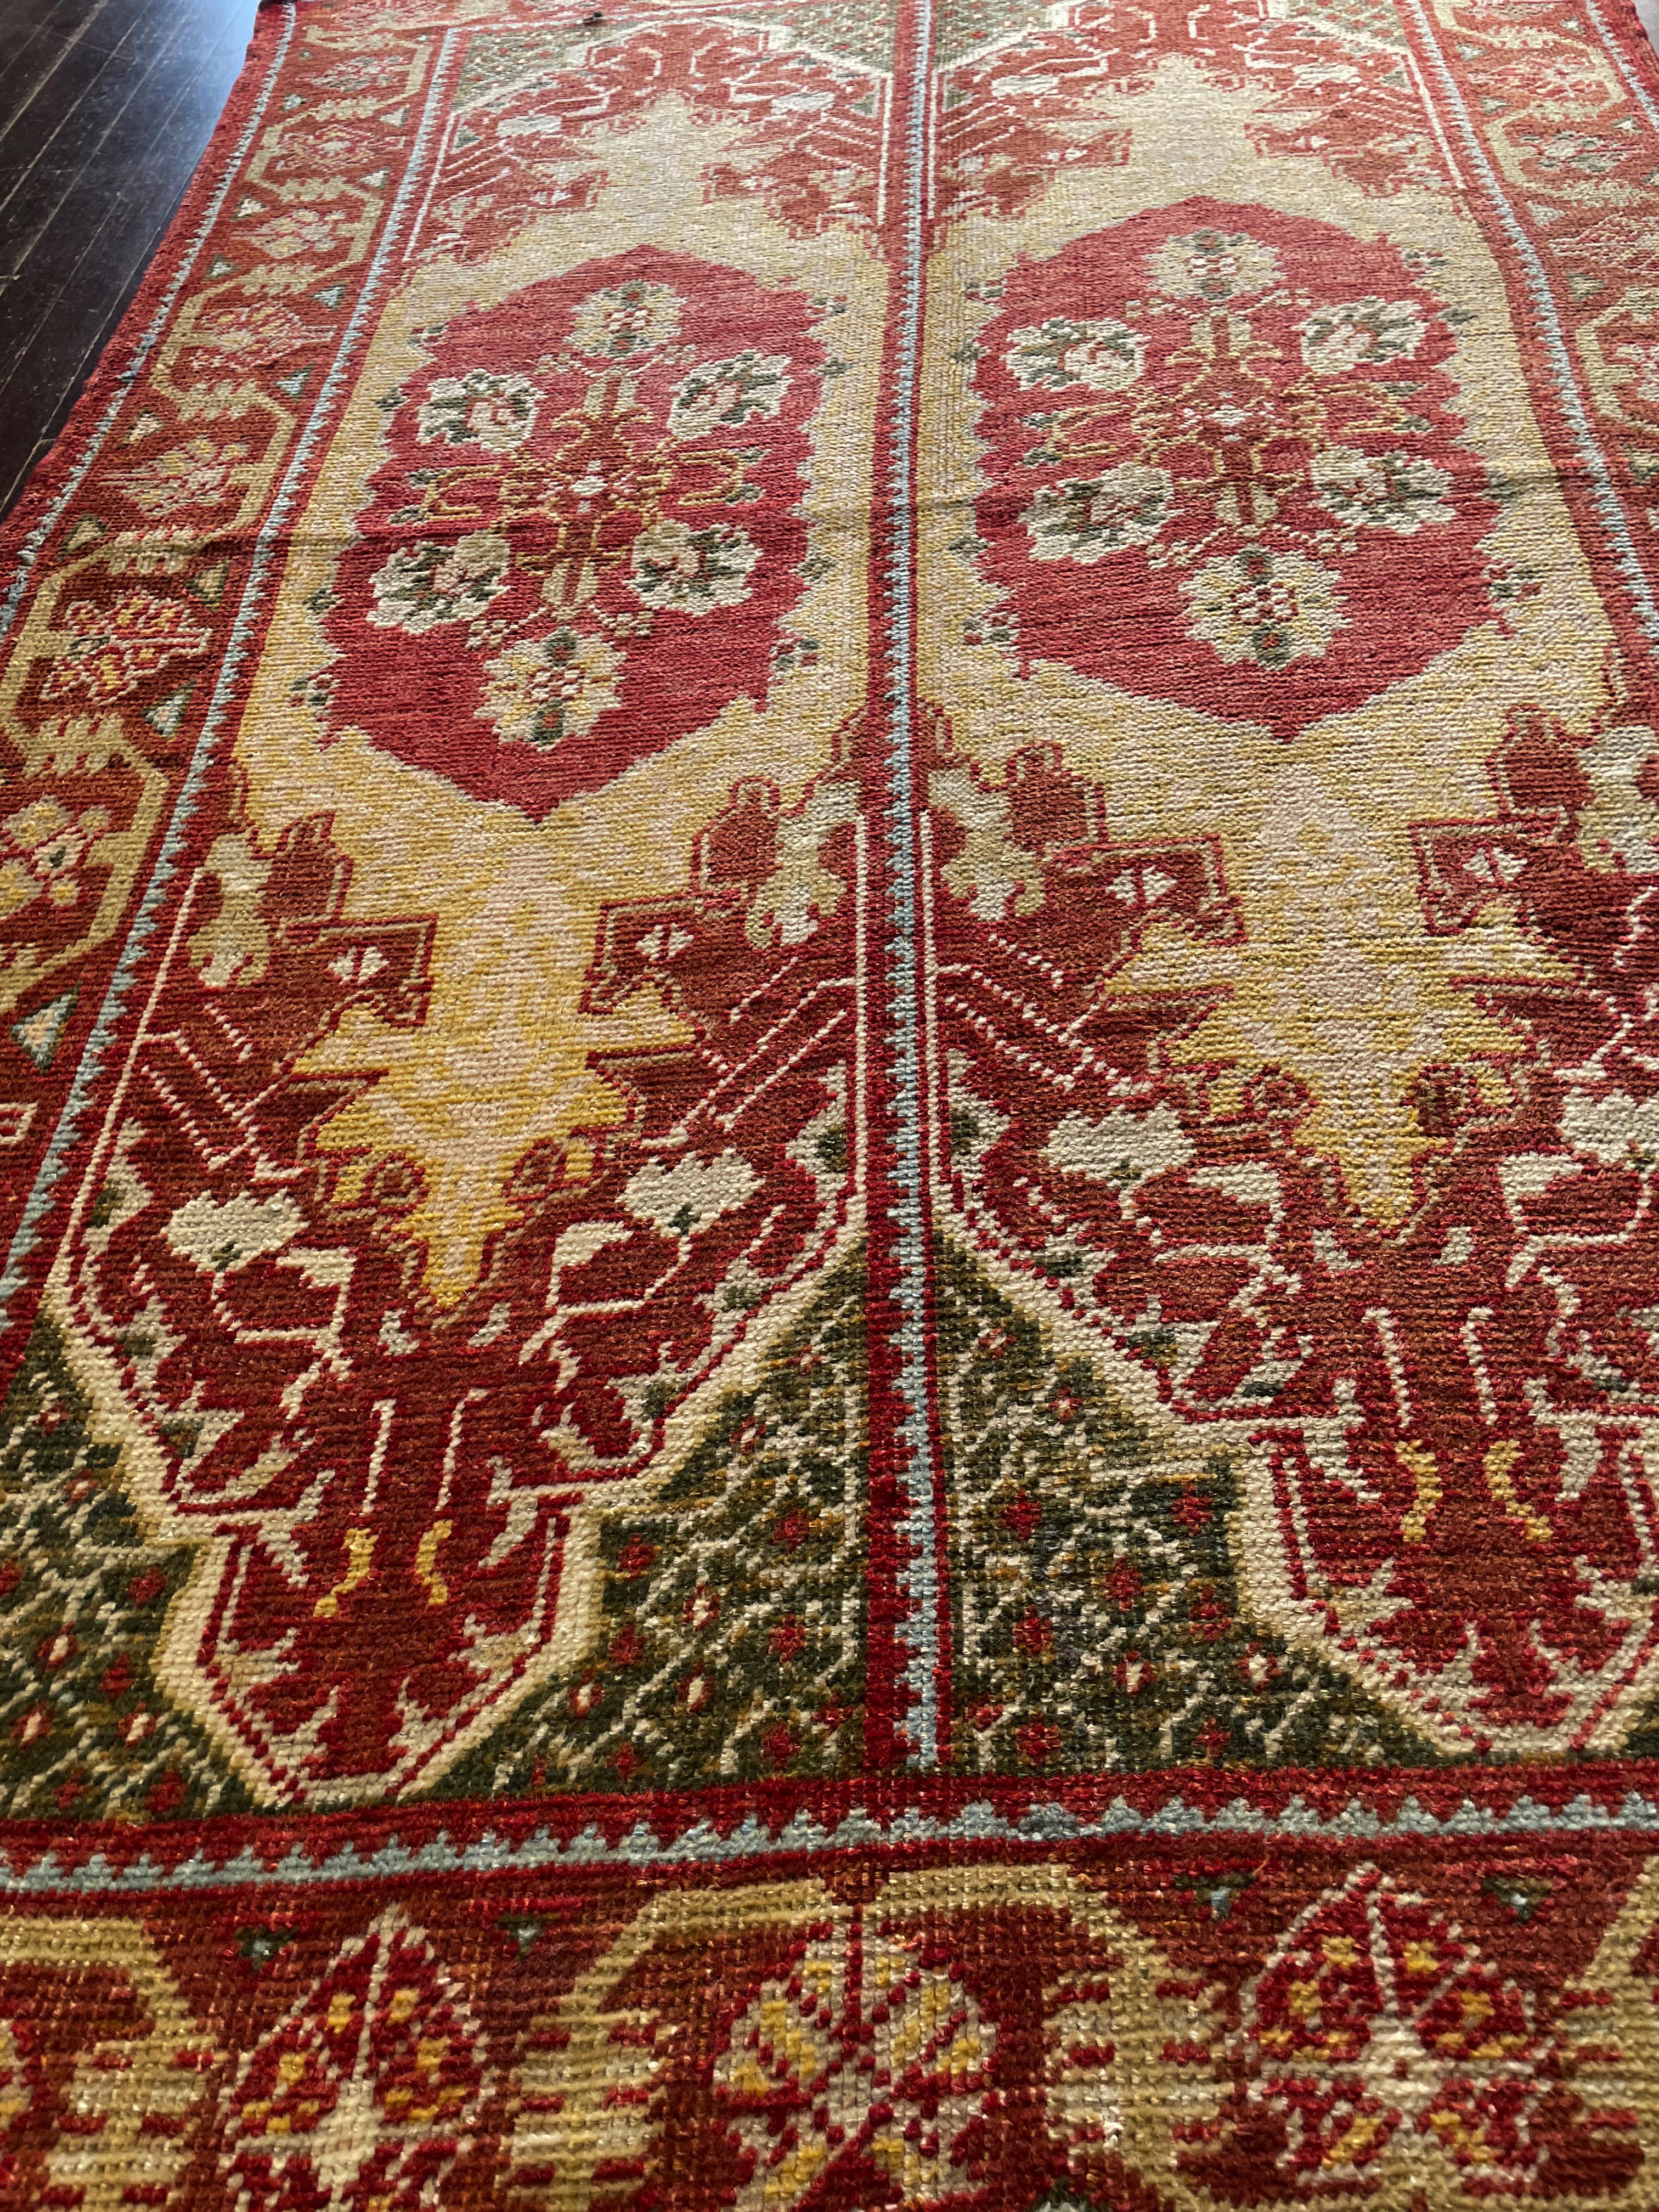 Antique Oushak Rug, Double Prayer In Good Condition For Sale In Evanston, IL